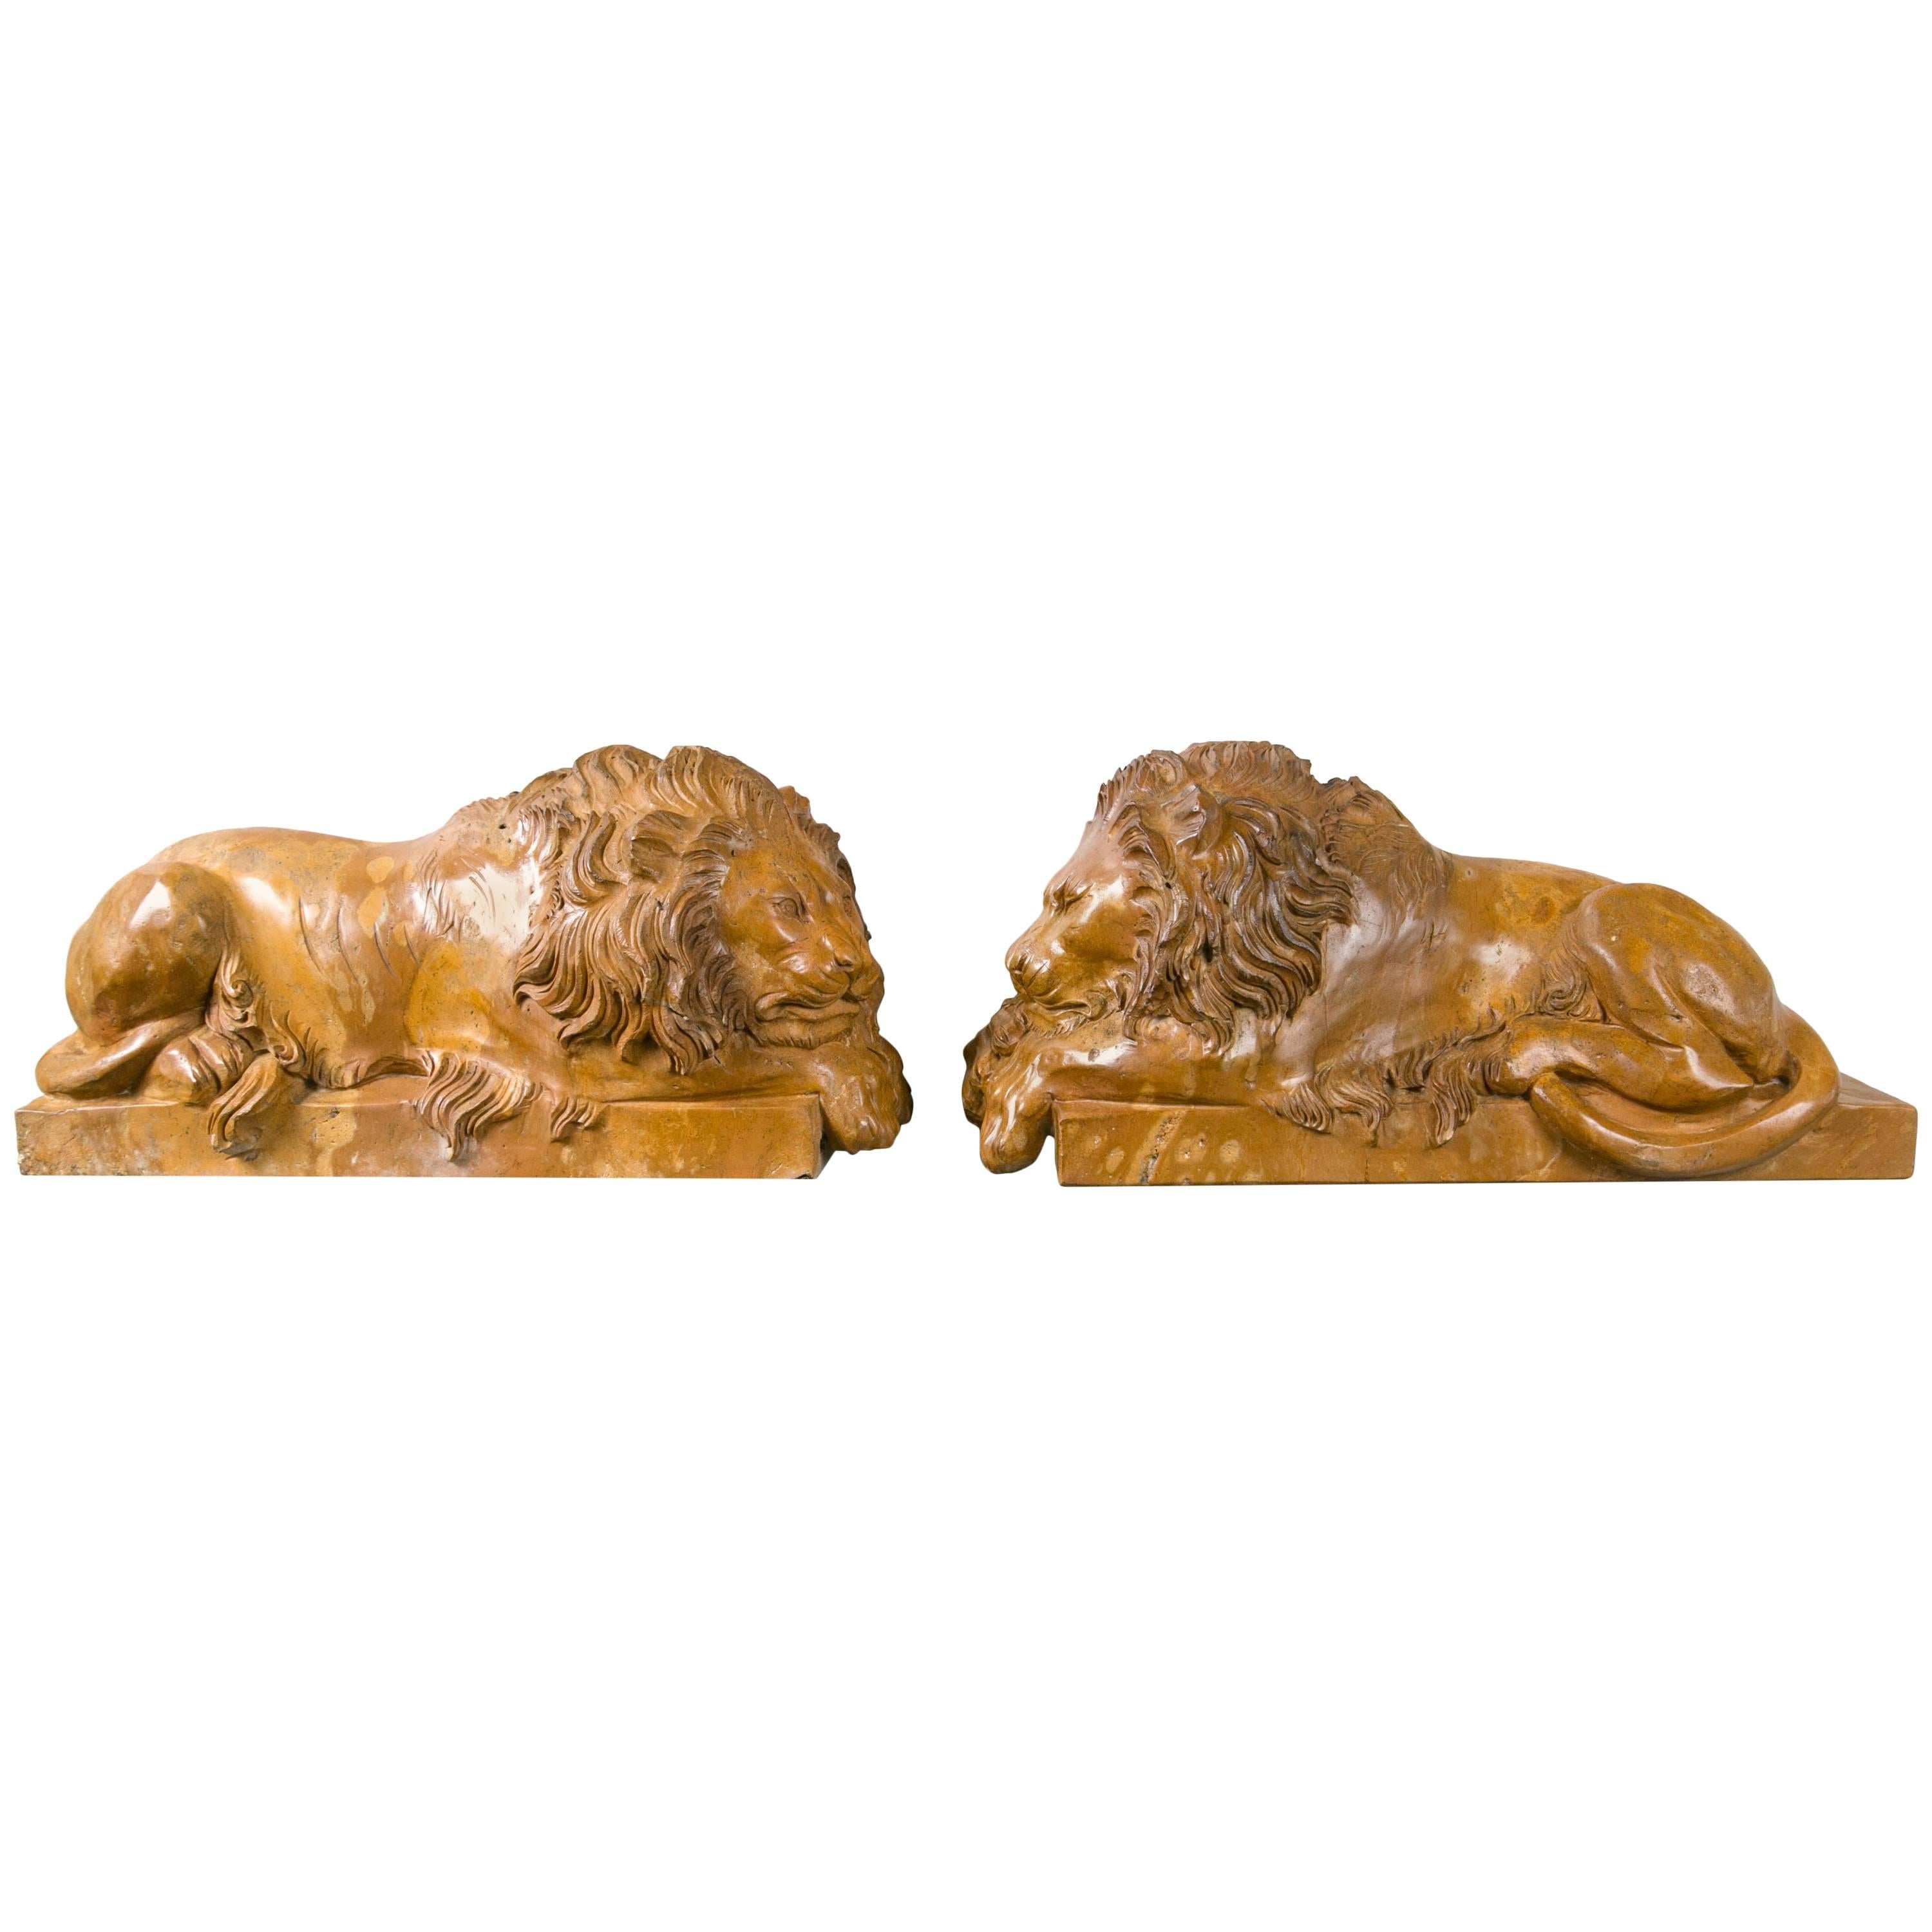 Solid Marble Recumbent Lions For Sale